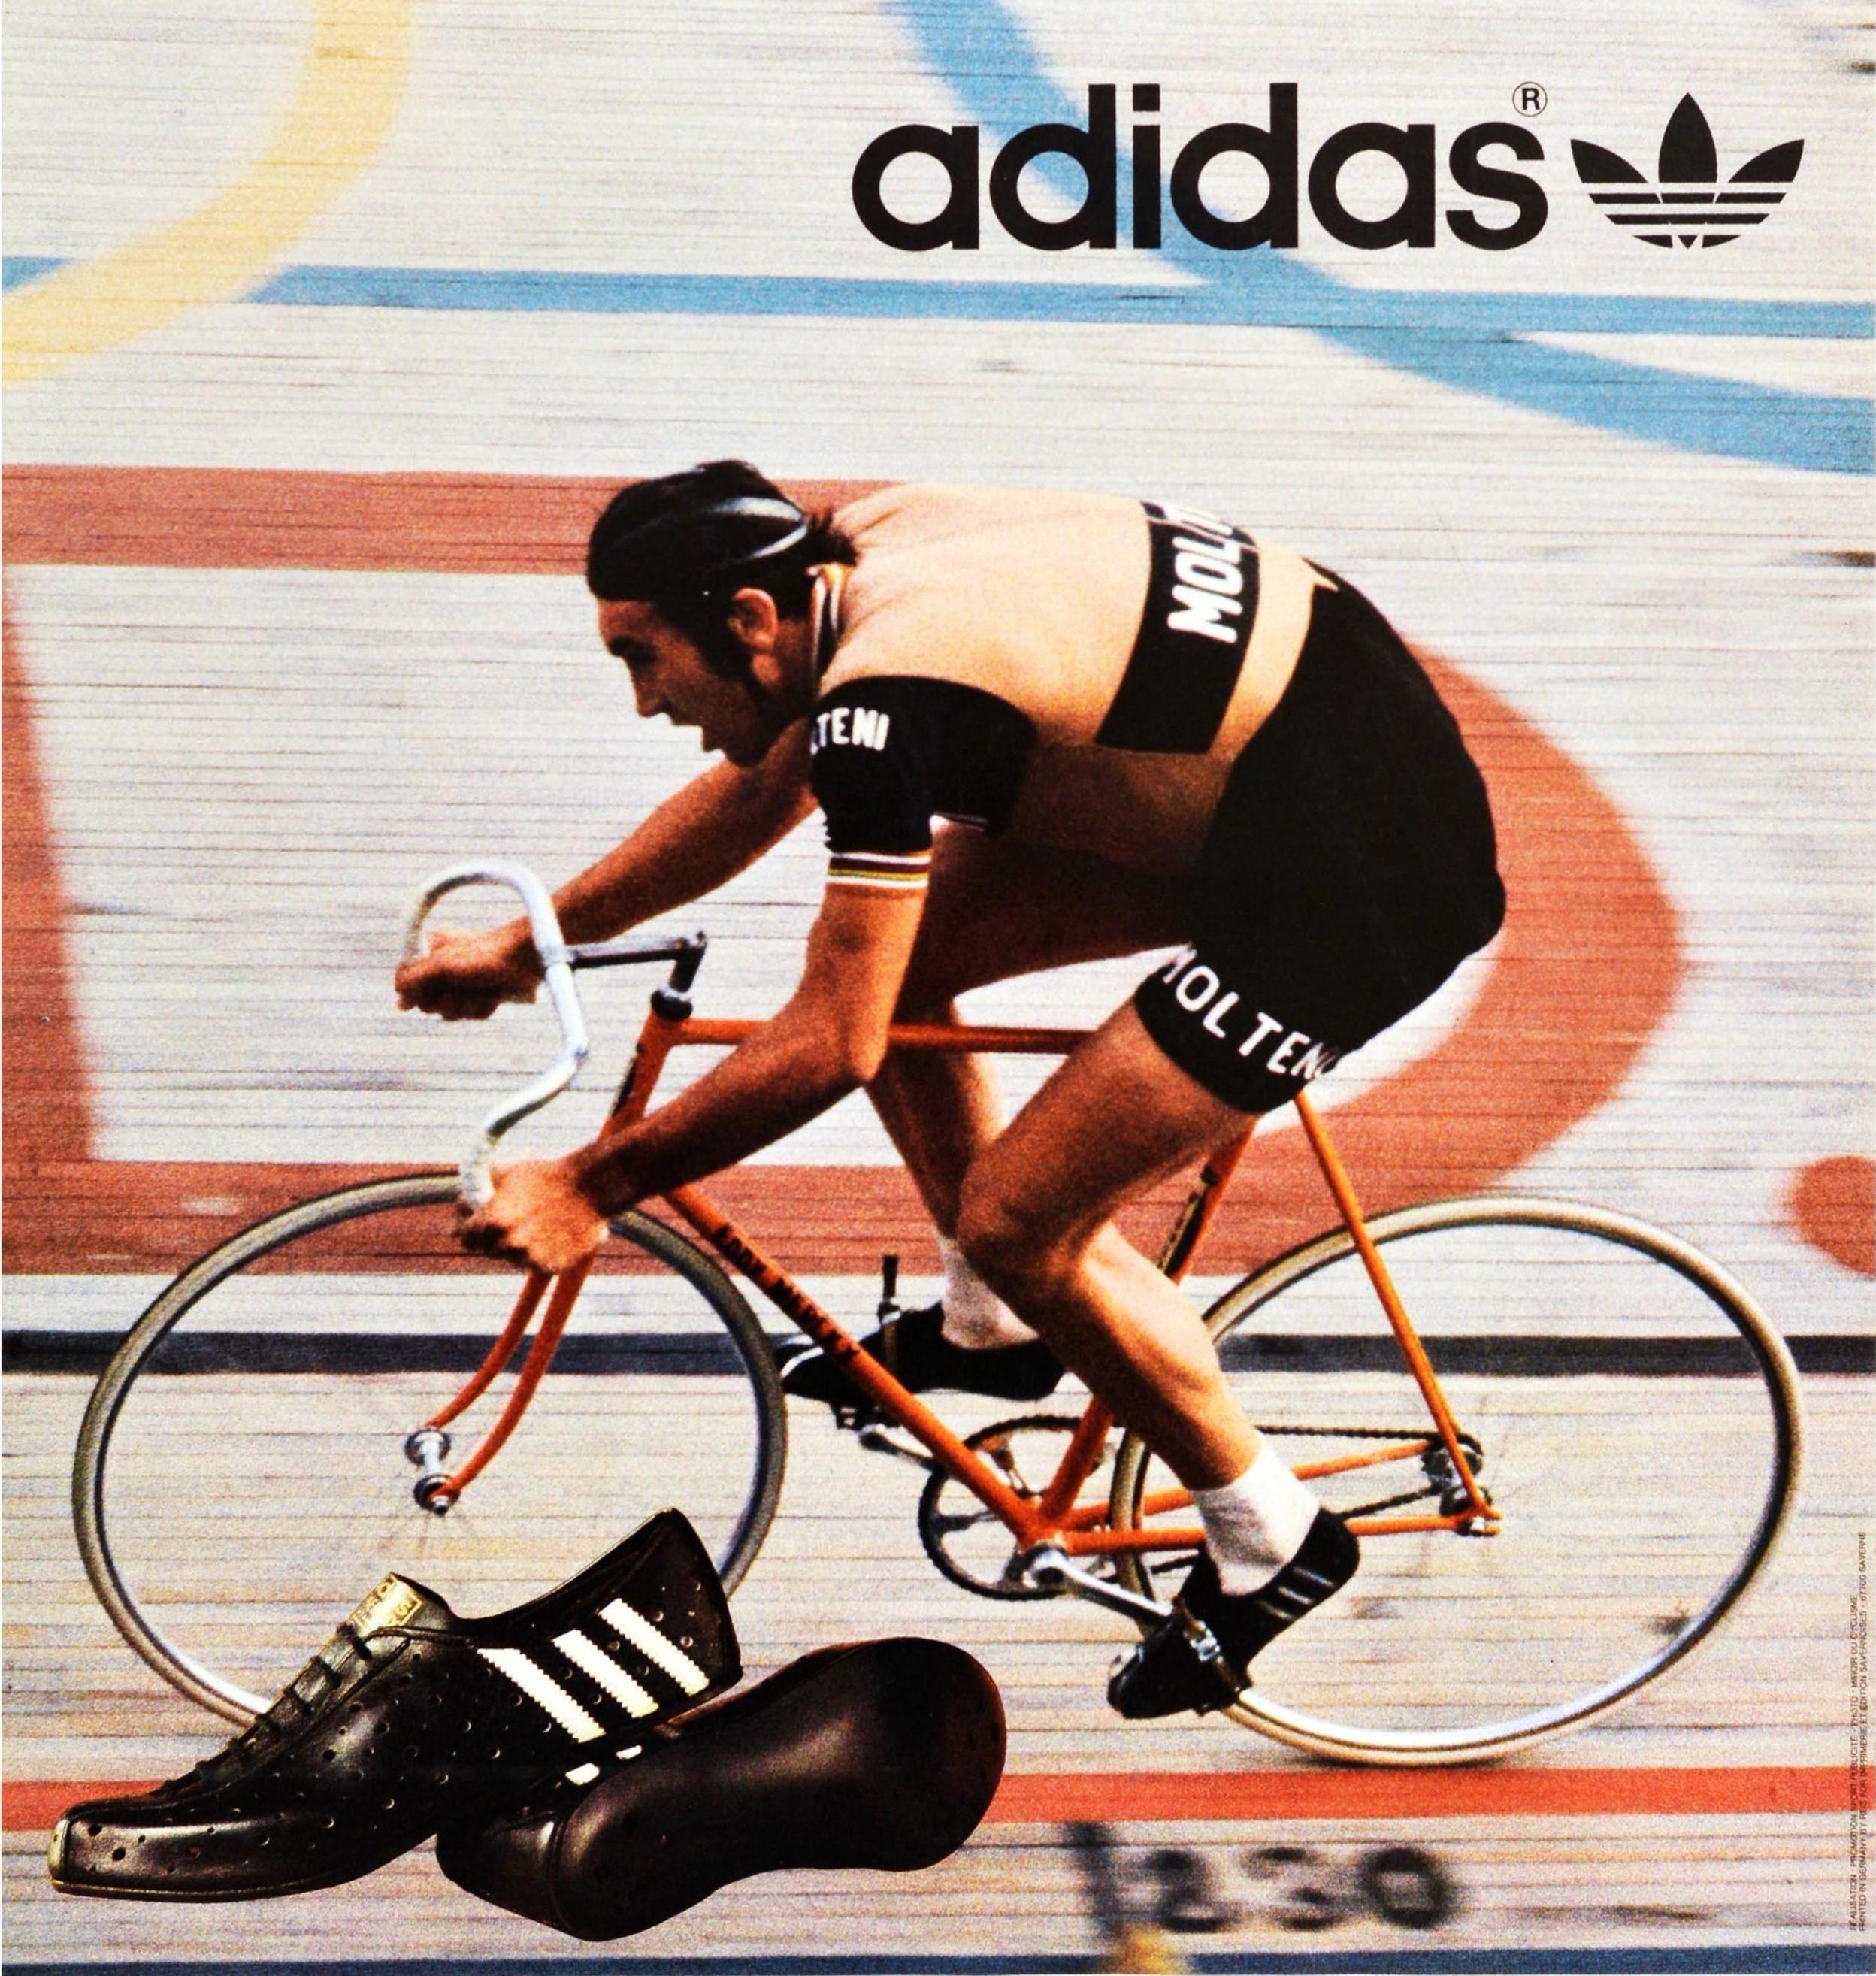 Original vintage advertising poster for Adidas shoes featuring a dynamic photograph of the professional road and track cyclist Eddy Merckx racing at speed in an indoor cycling event with the Olympic rings on the track in the background by the Adidas